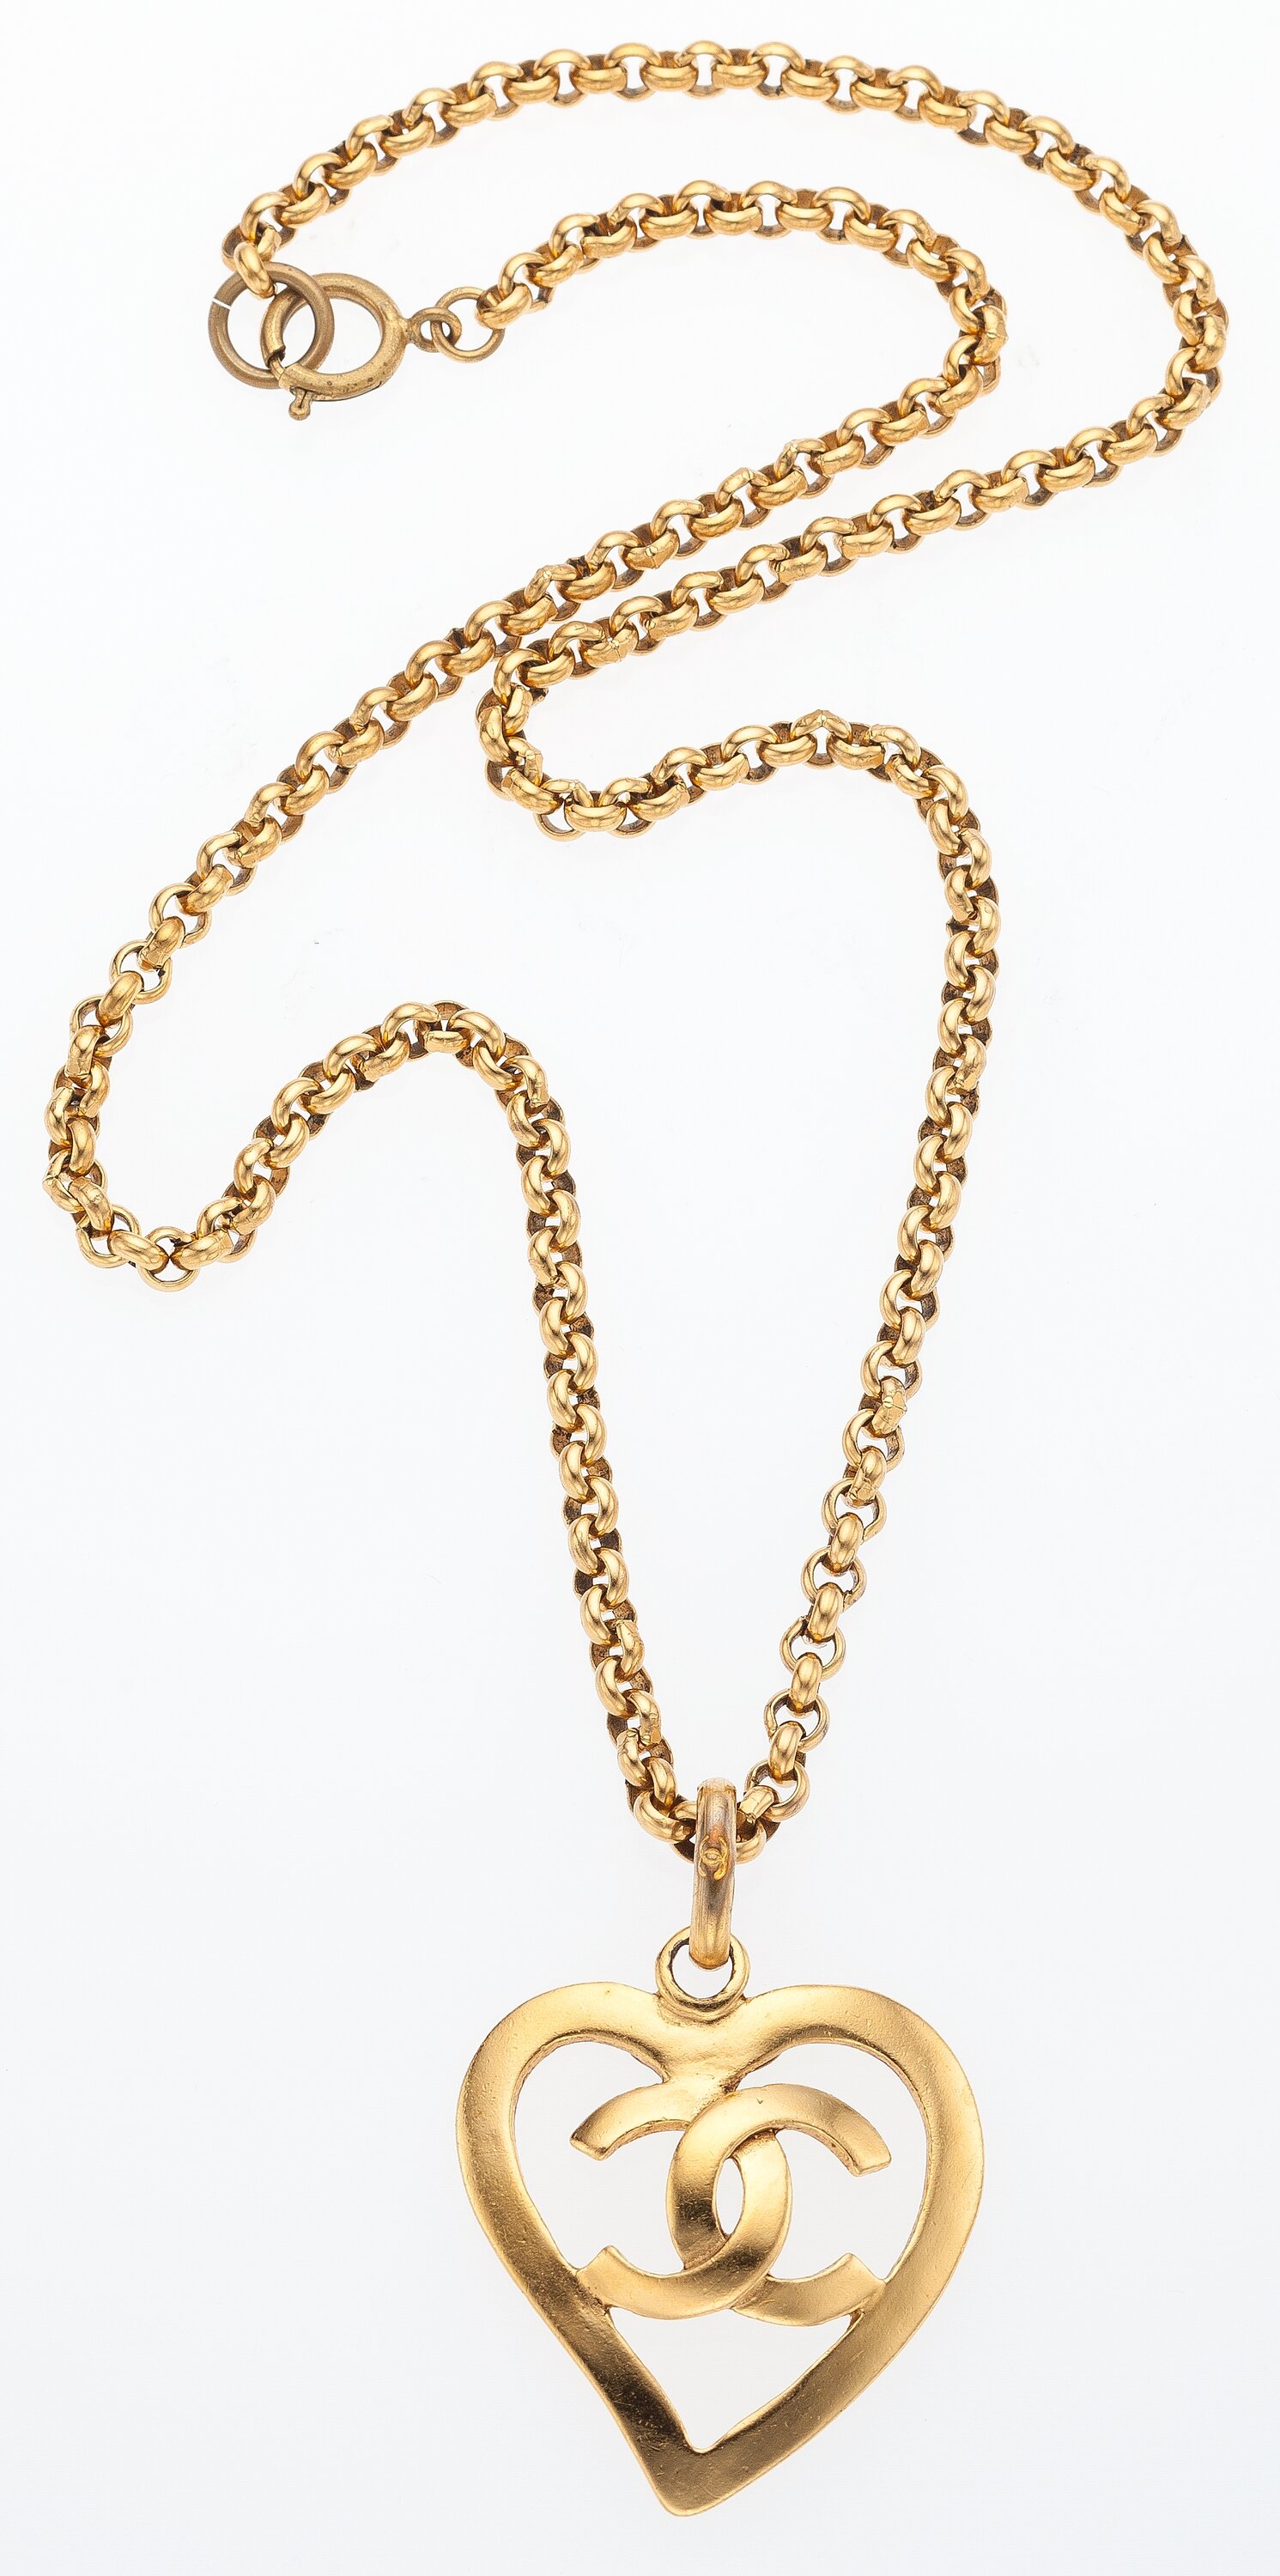 Sold at Auction: JEWELRY. (2) Chanel Gold-Tone Necklaces.